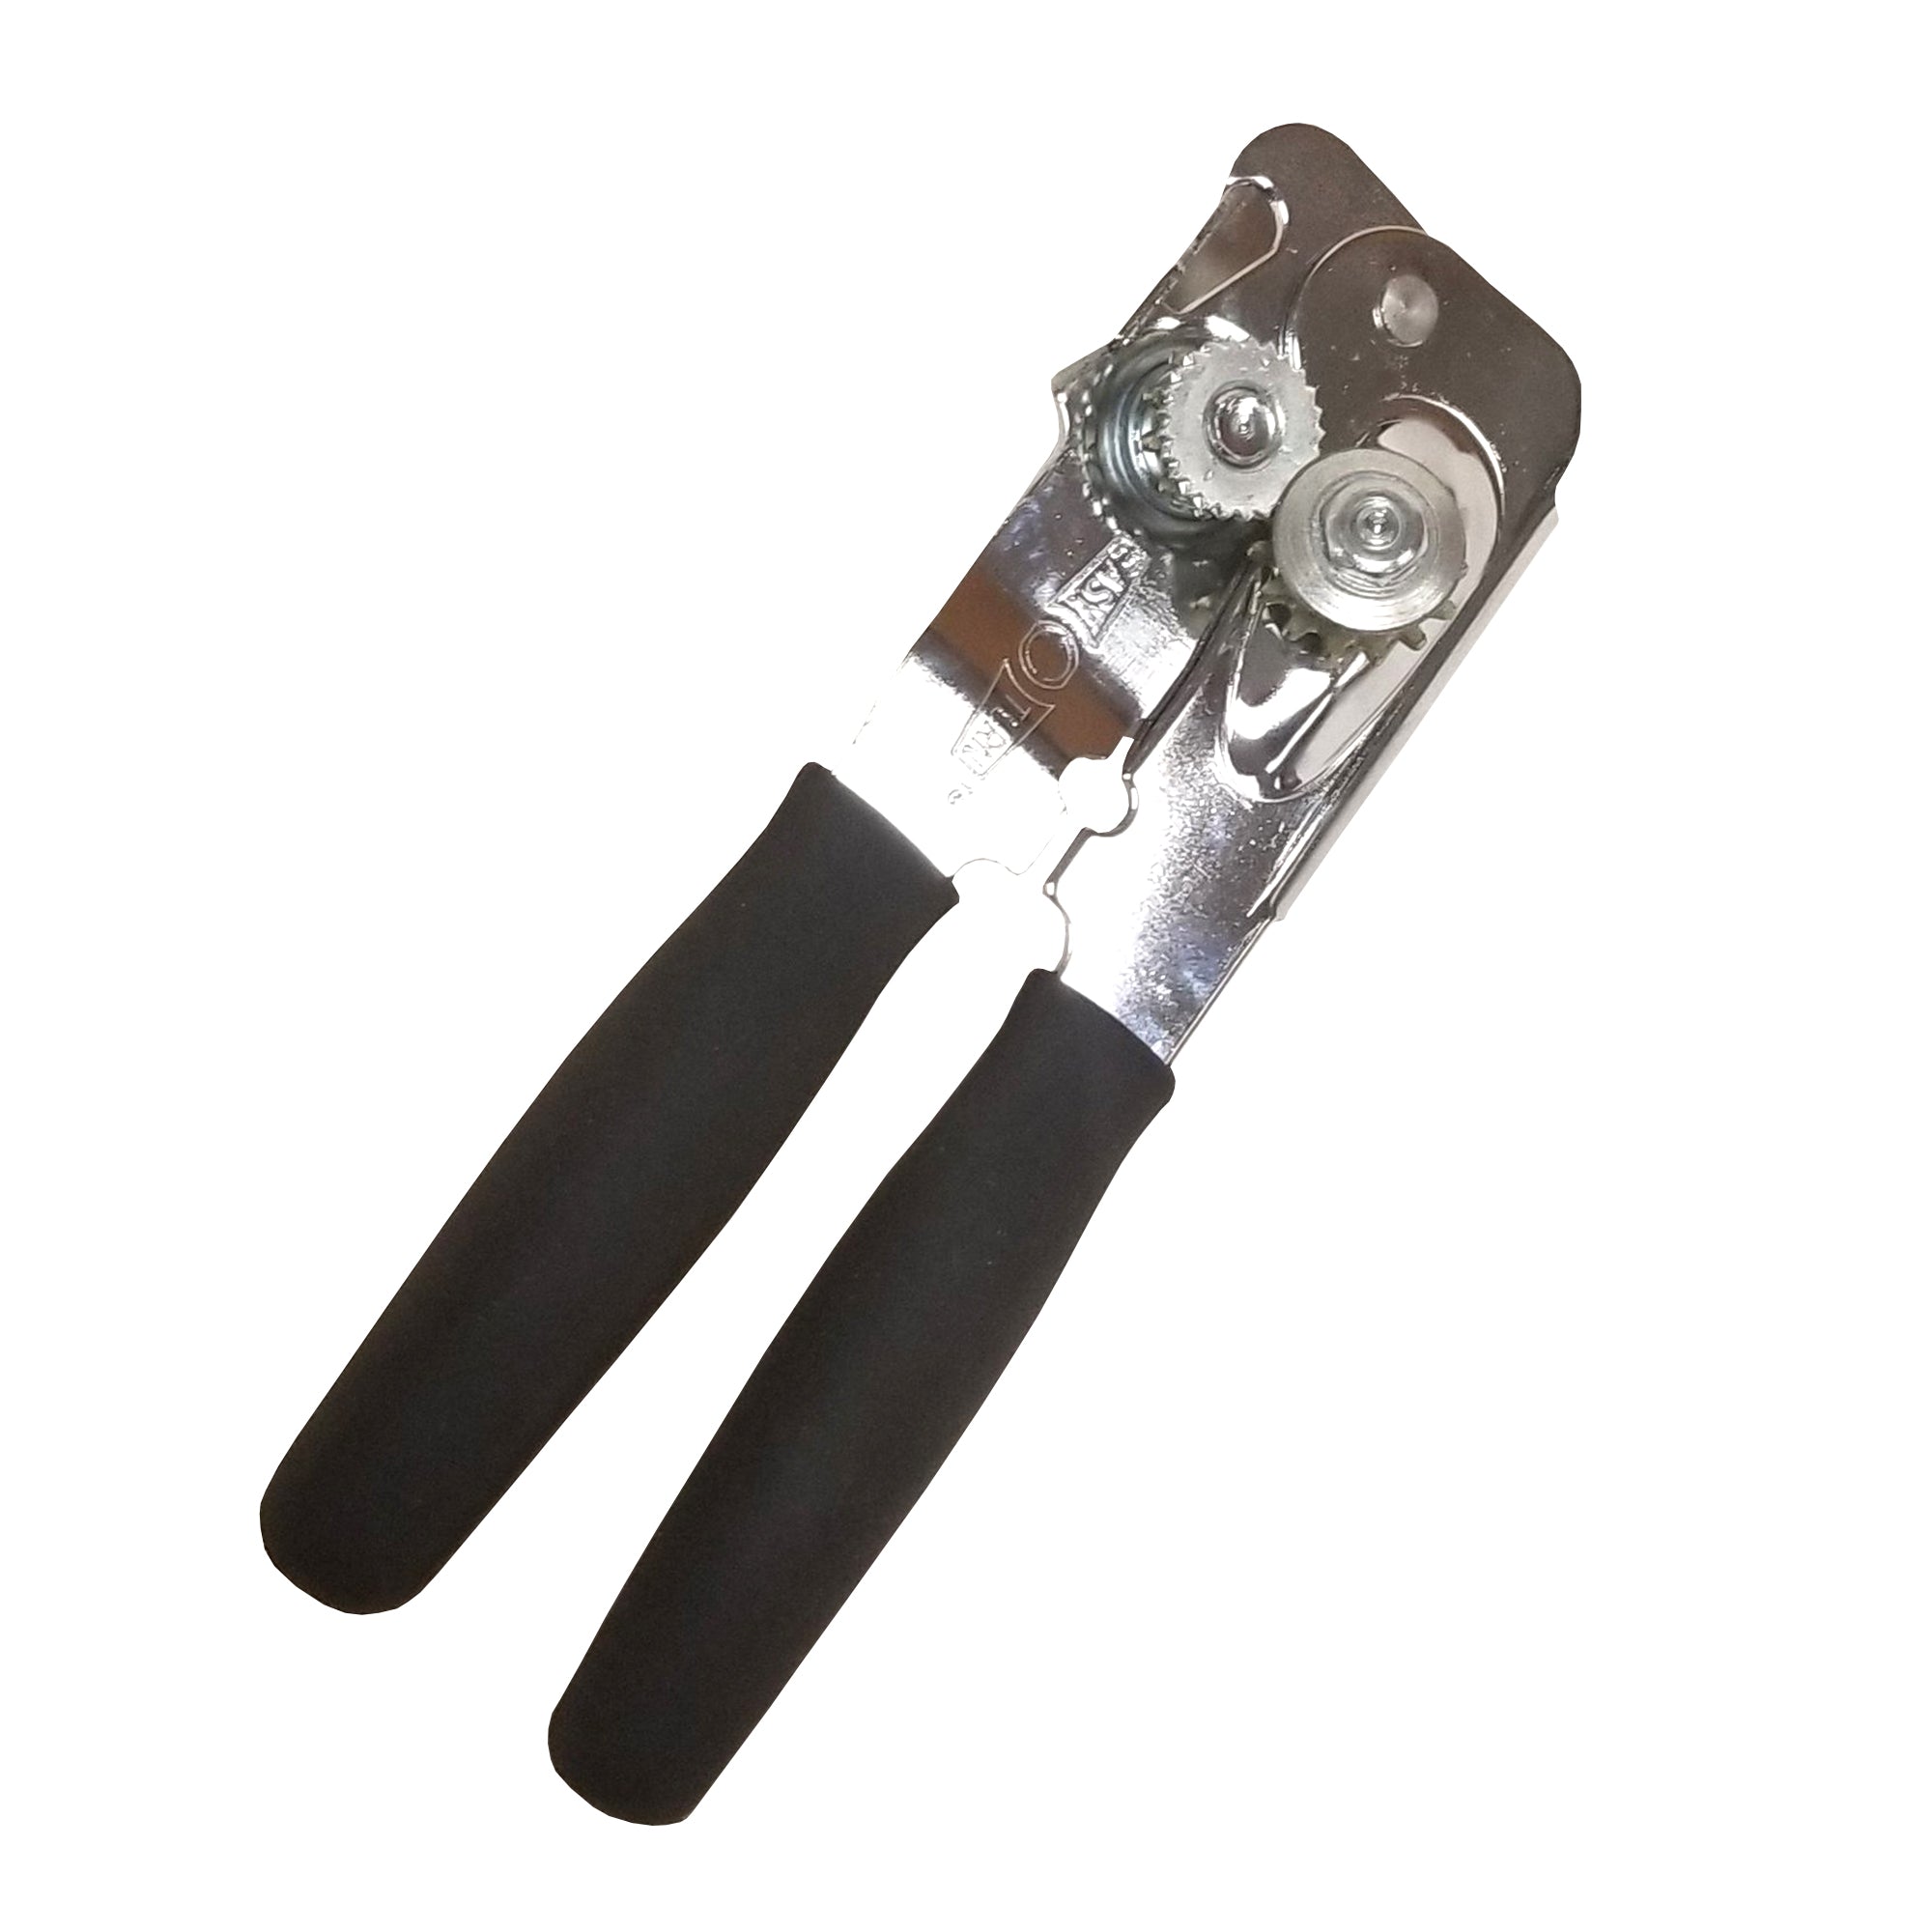 Winco CO-3 Manual Can Opener